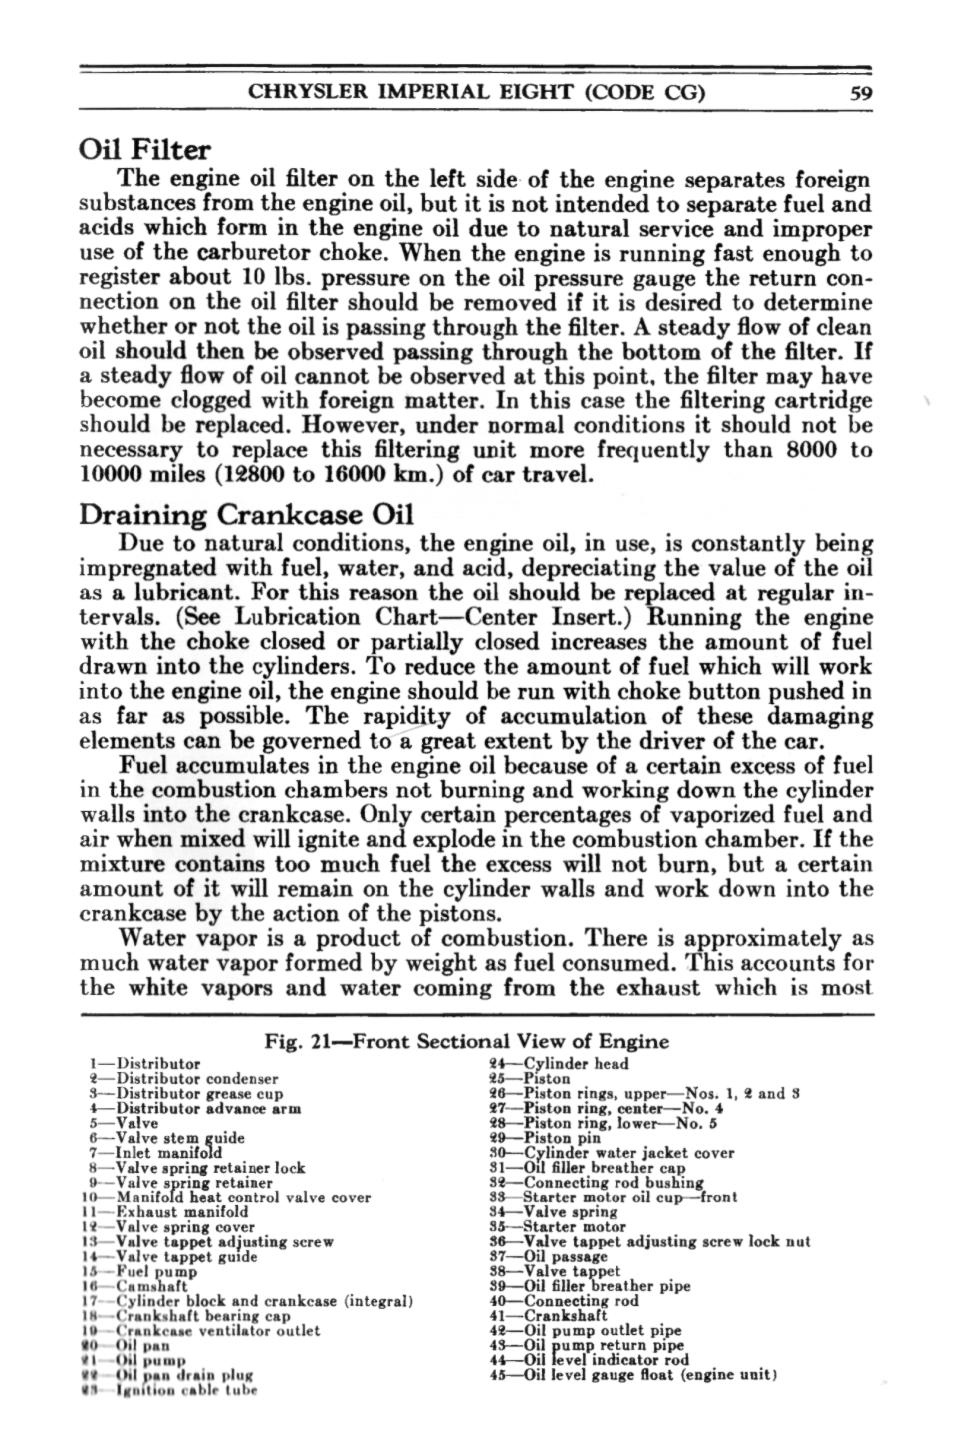 1931 Chrysler Imperial Owners Manual Page 12